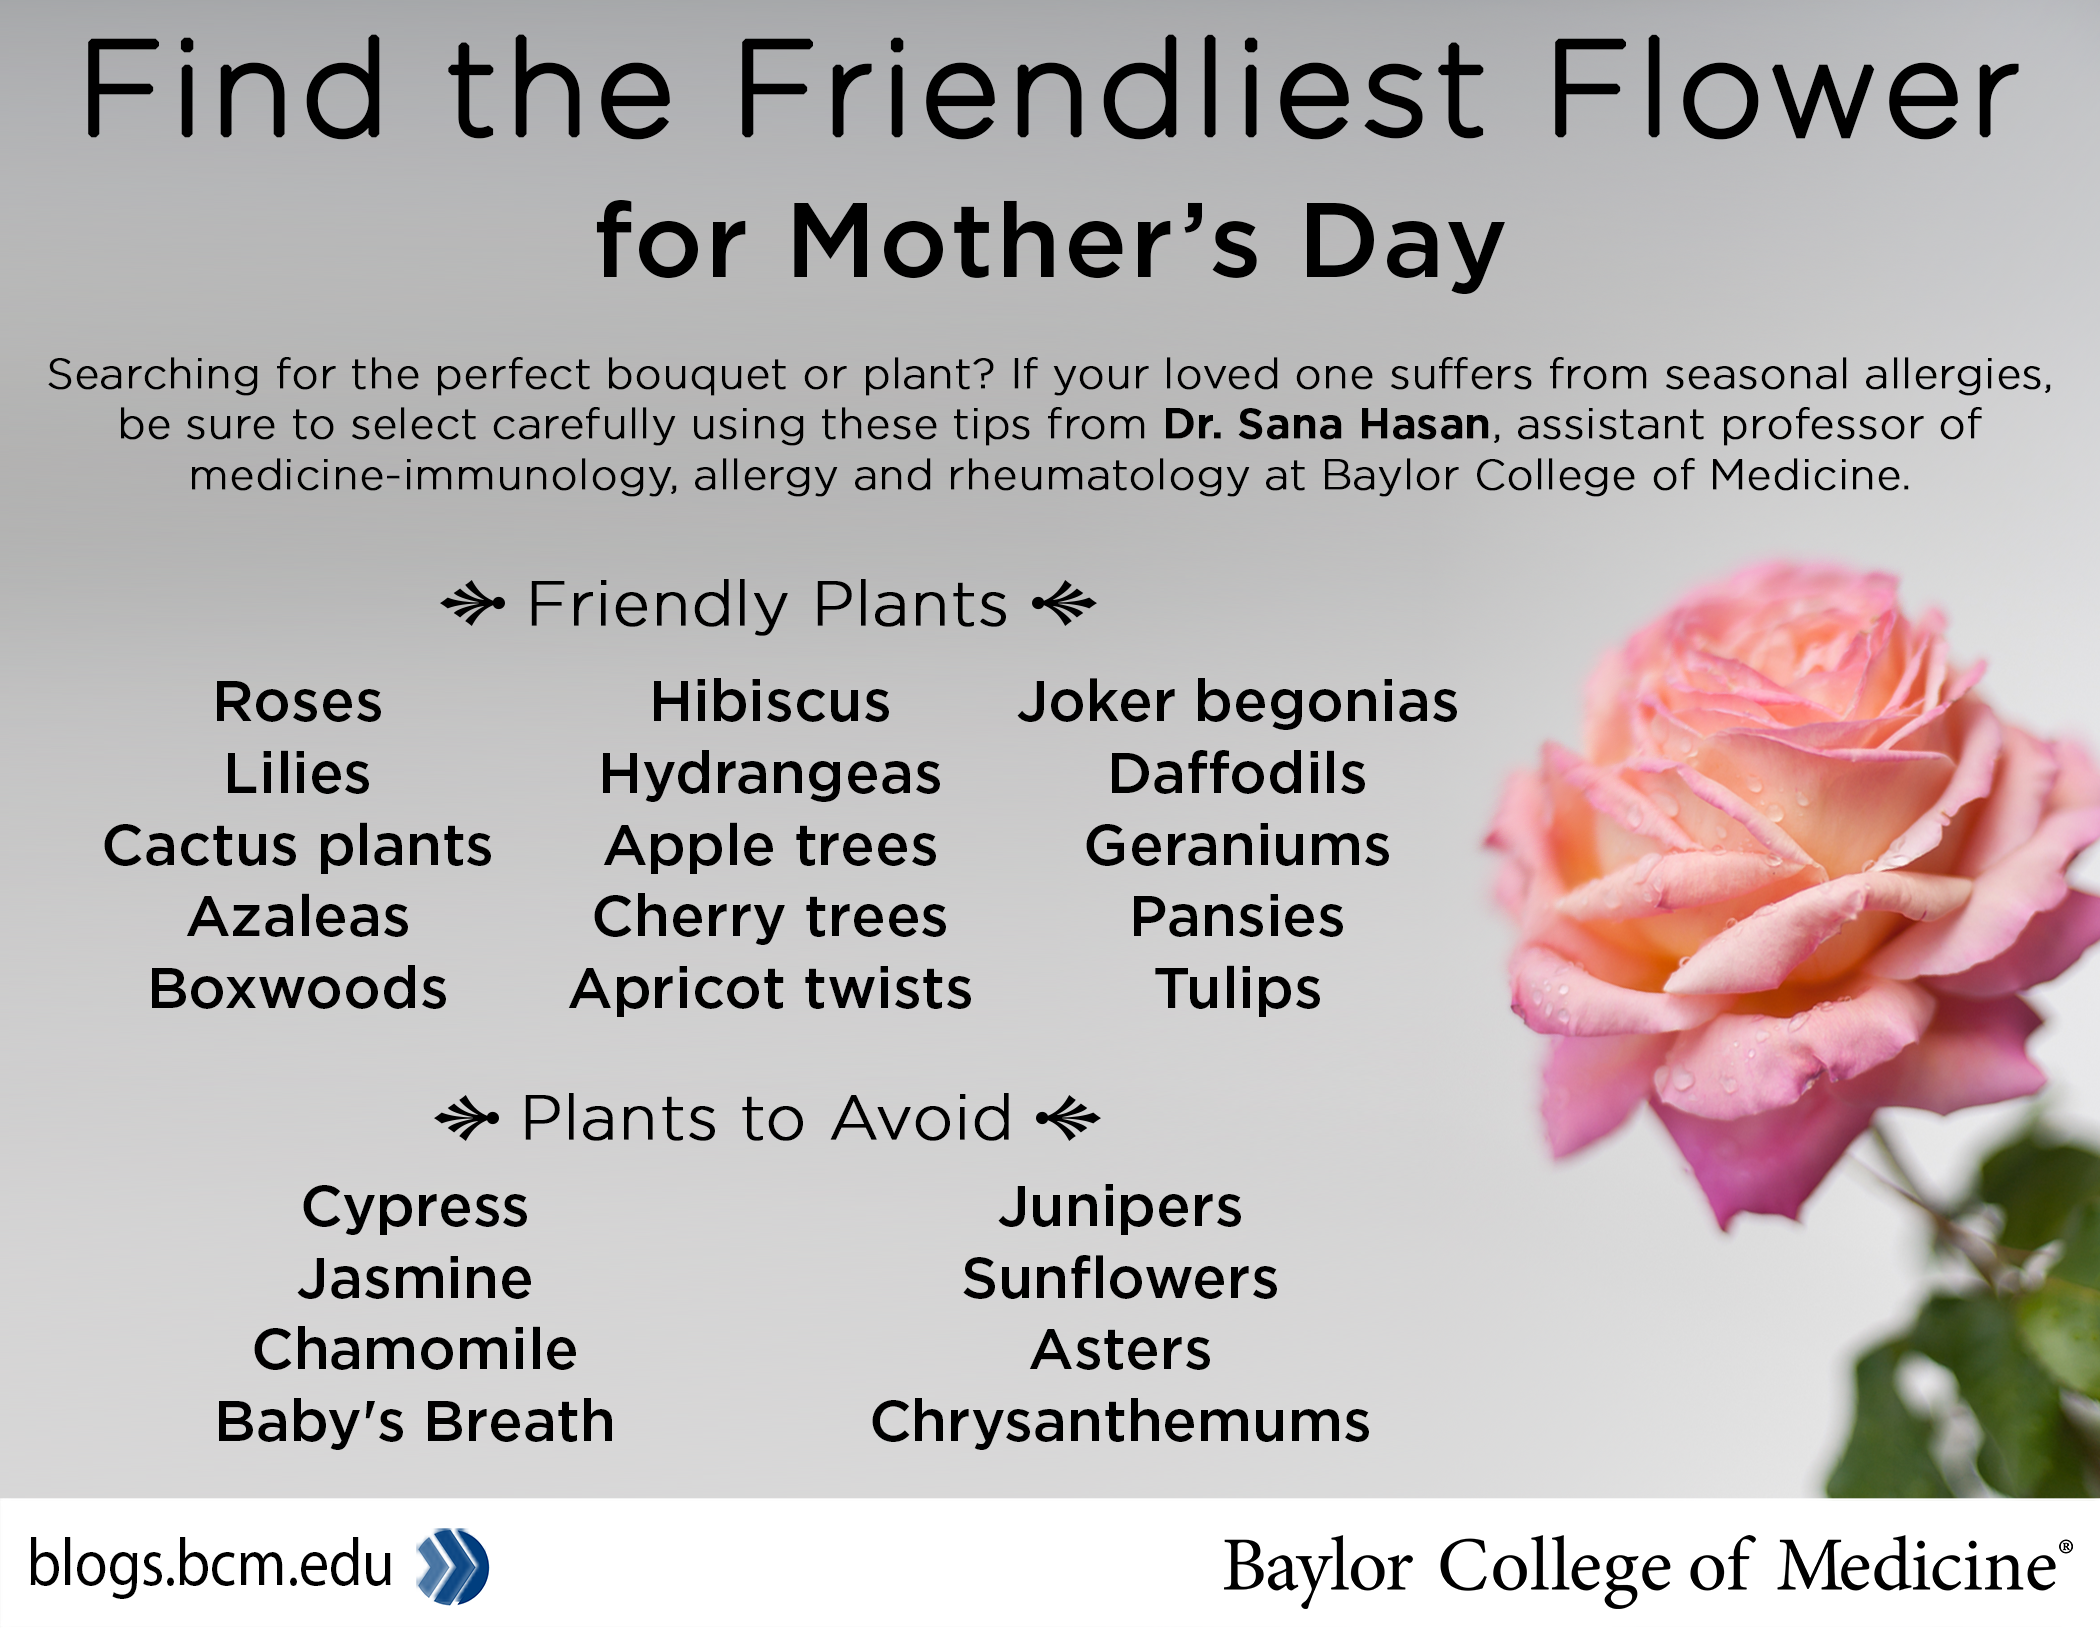 Friendly plants: Roses and lilies, Cactus plants, Azaleas, Boxwoods, Hibiscus, Hydrangeas, Apple and cherry trees, Apricot twists, Joker begonias, Daffodils, Geraniums, Pansies, Tulips. Plants to avoid: Cypress, Jasmine, Chamomile, Junipers, Chrysanthemums, Asters, Sunflowers.